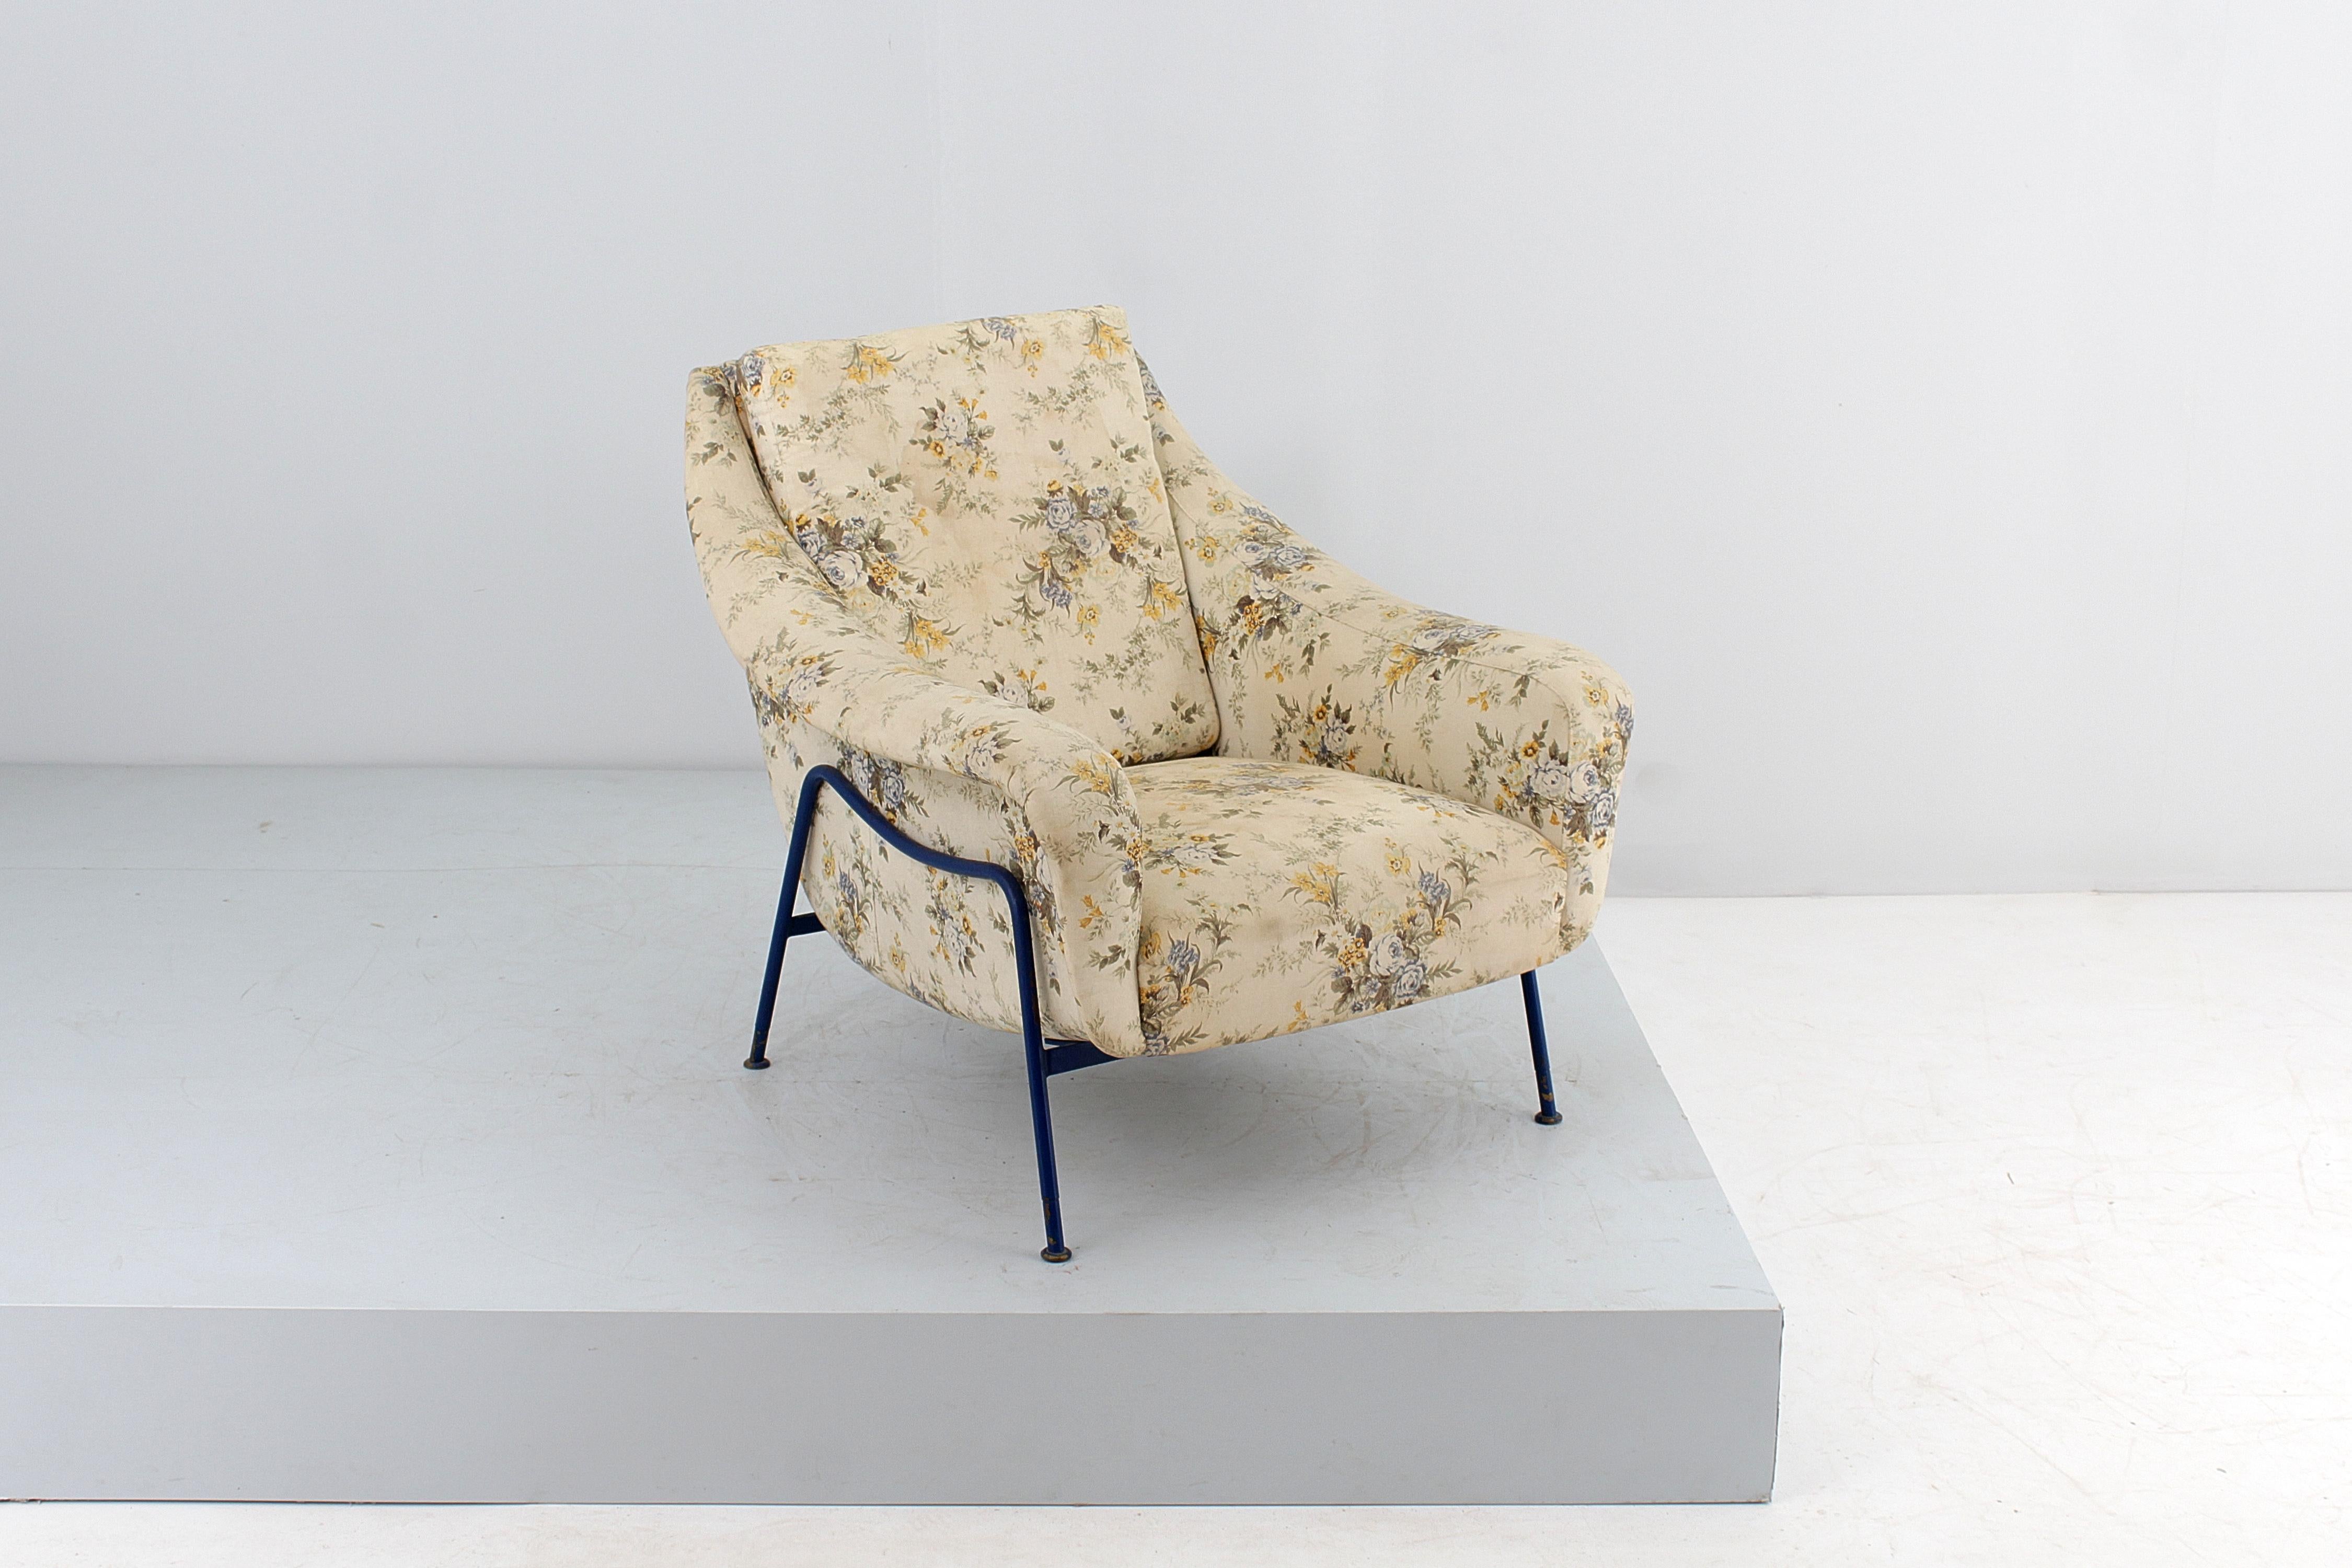 Beautiful armchair with wooden structure covered in floral fabric with blue metal tubular structure. In the style of Gastone Rinaldi, Italian production of the 50s.
Wear consistent with age and use.